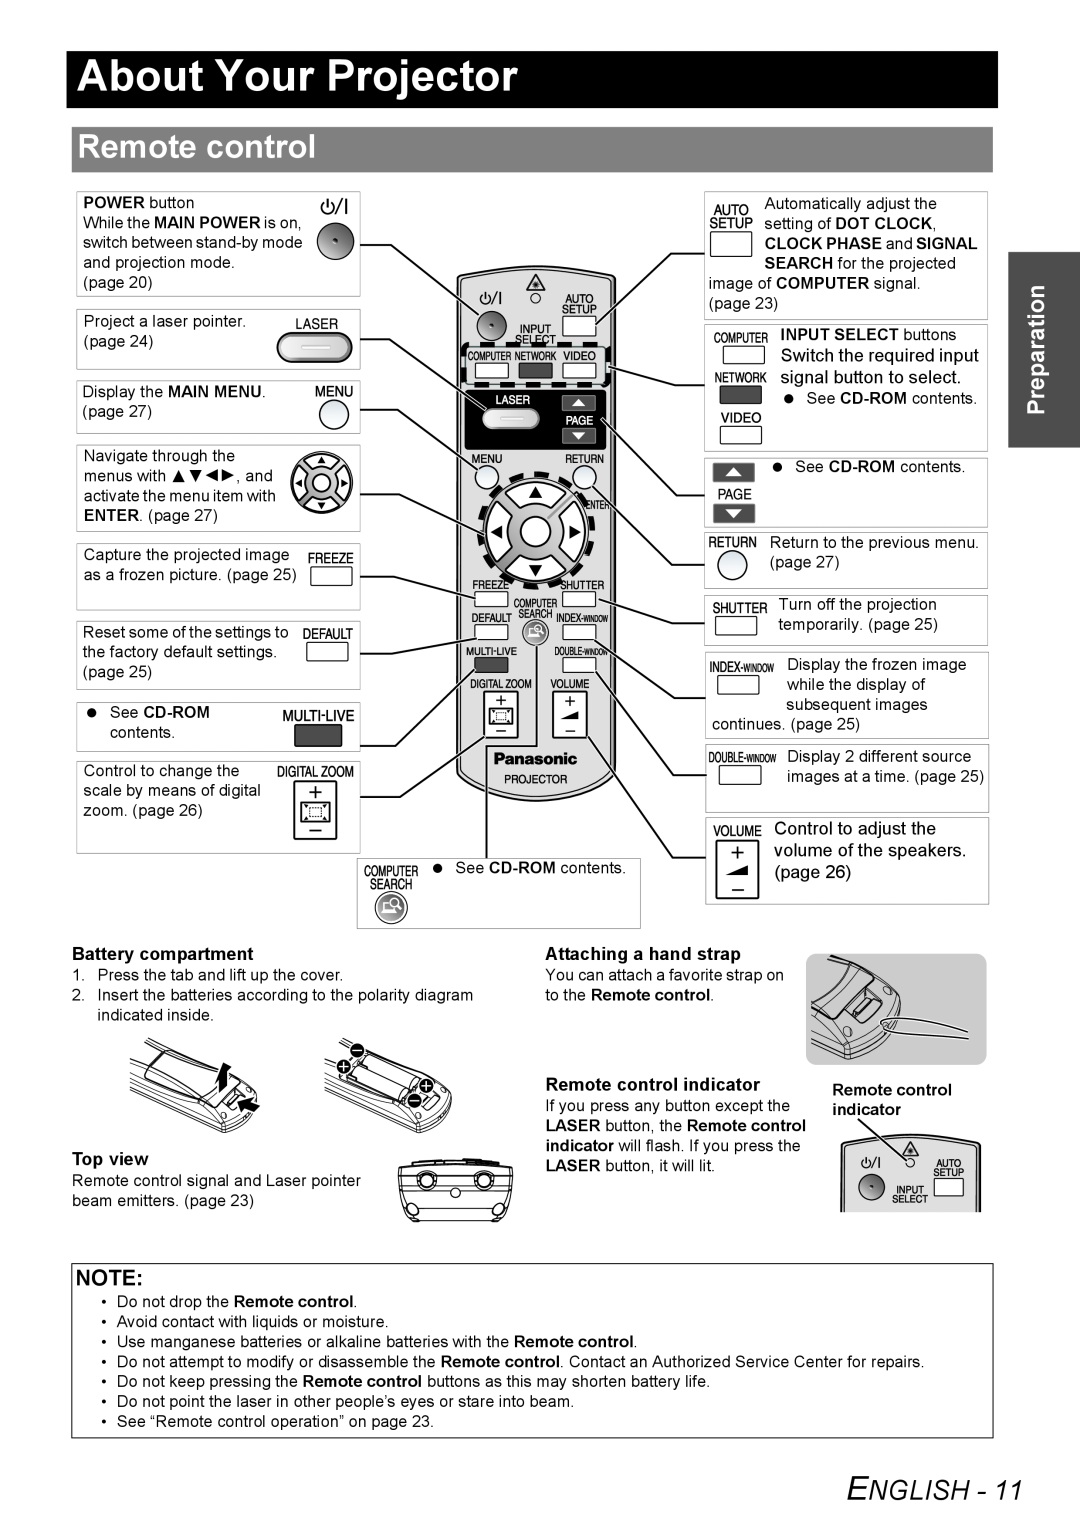 Philips PT-FW100NTU manual About Your Projector, Remote control, English, Preparation 